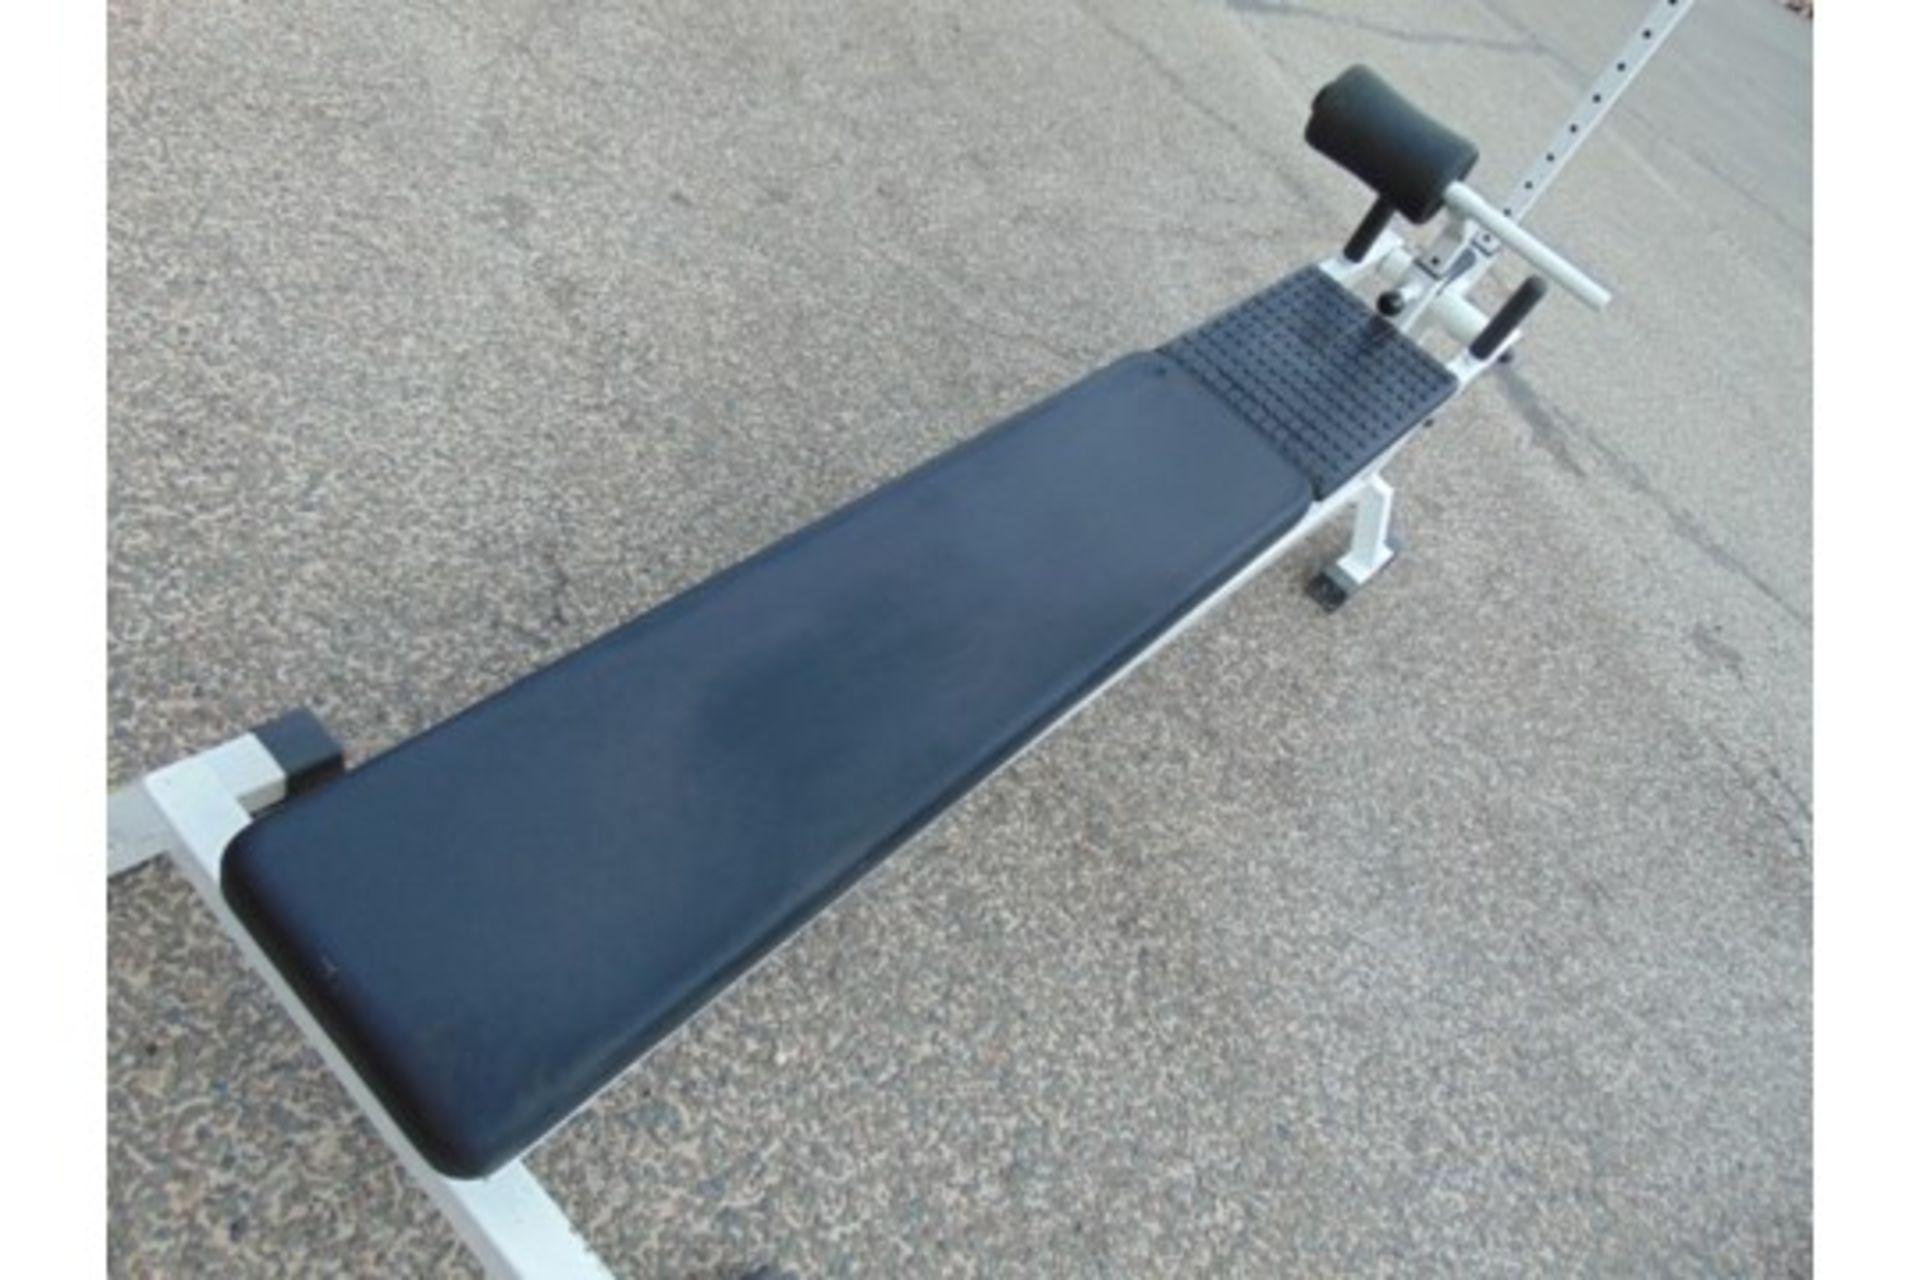 Body Sport Olympic Adjustable Ab Bench - Image 2 of 7